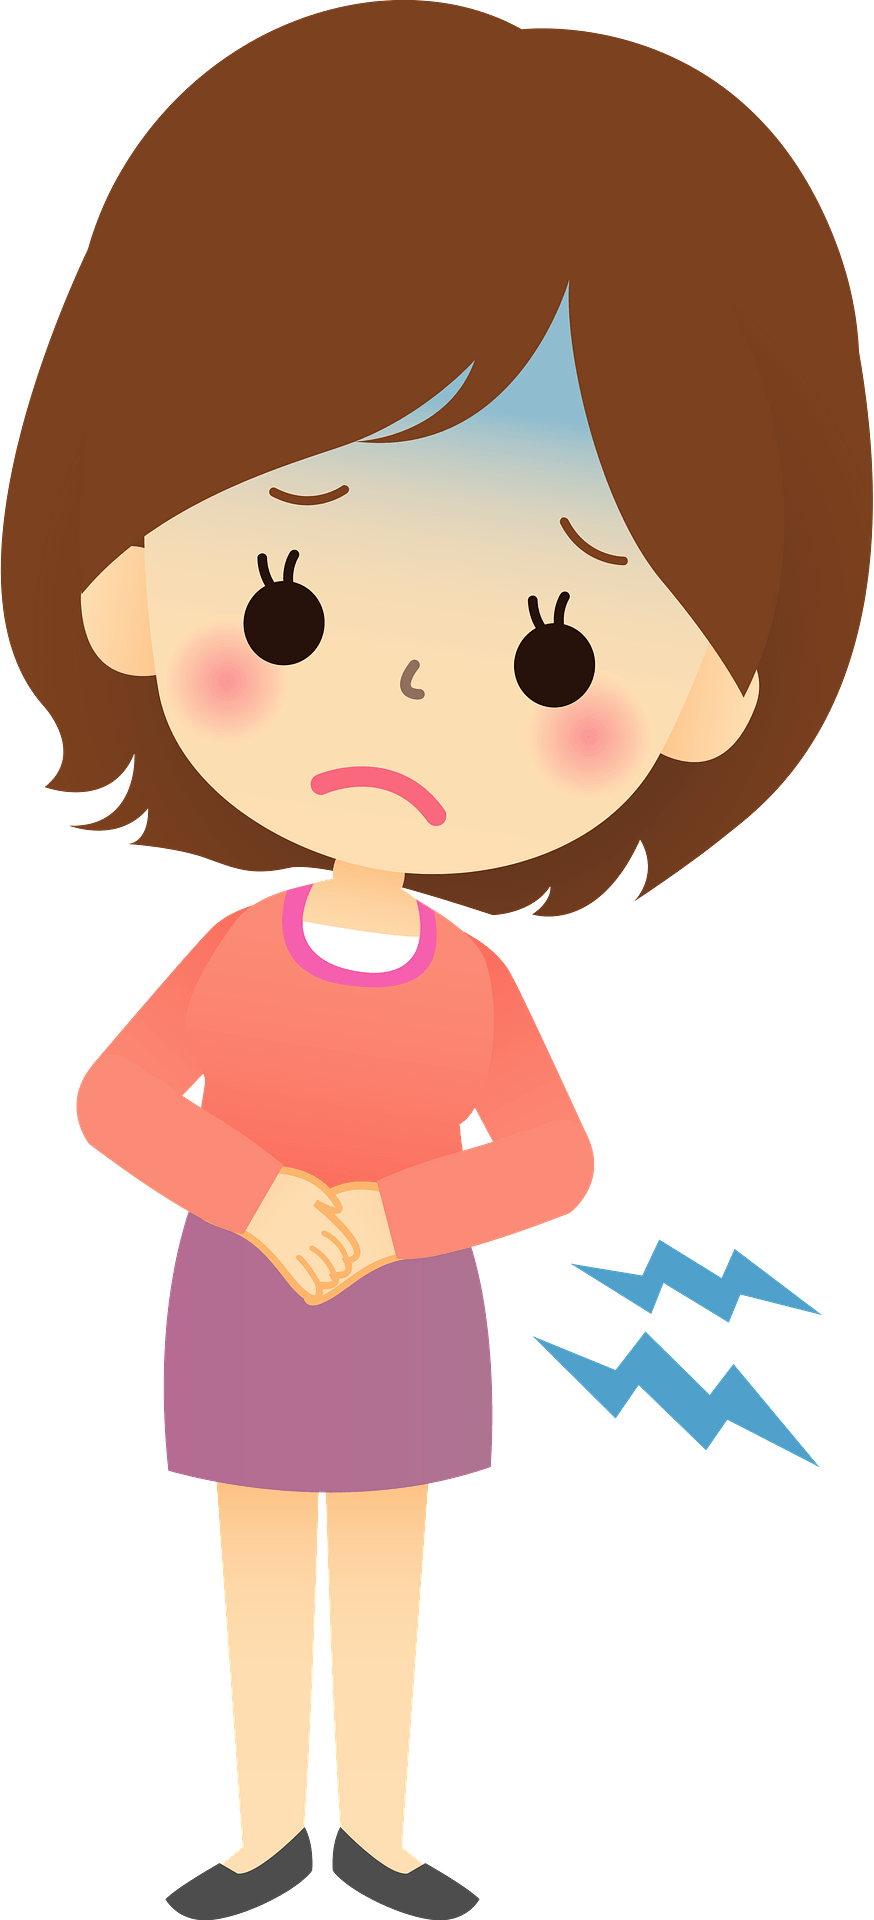 Stomach Ache Clip Art N16 free image download - Clip Art Library